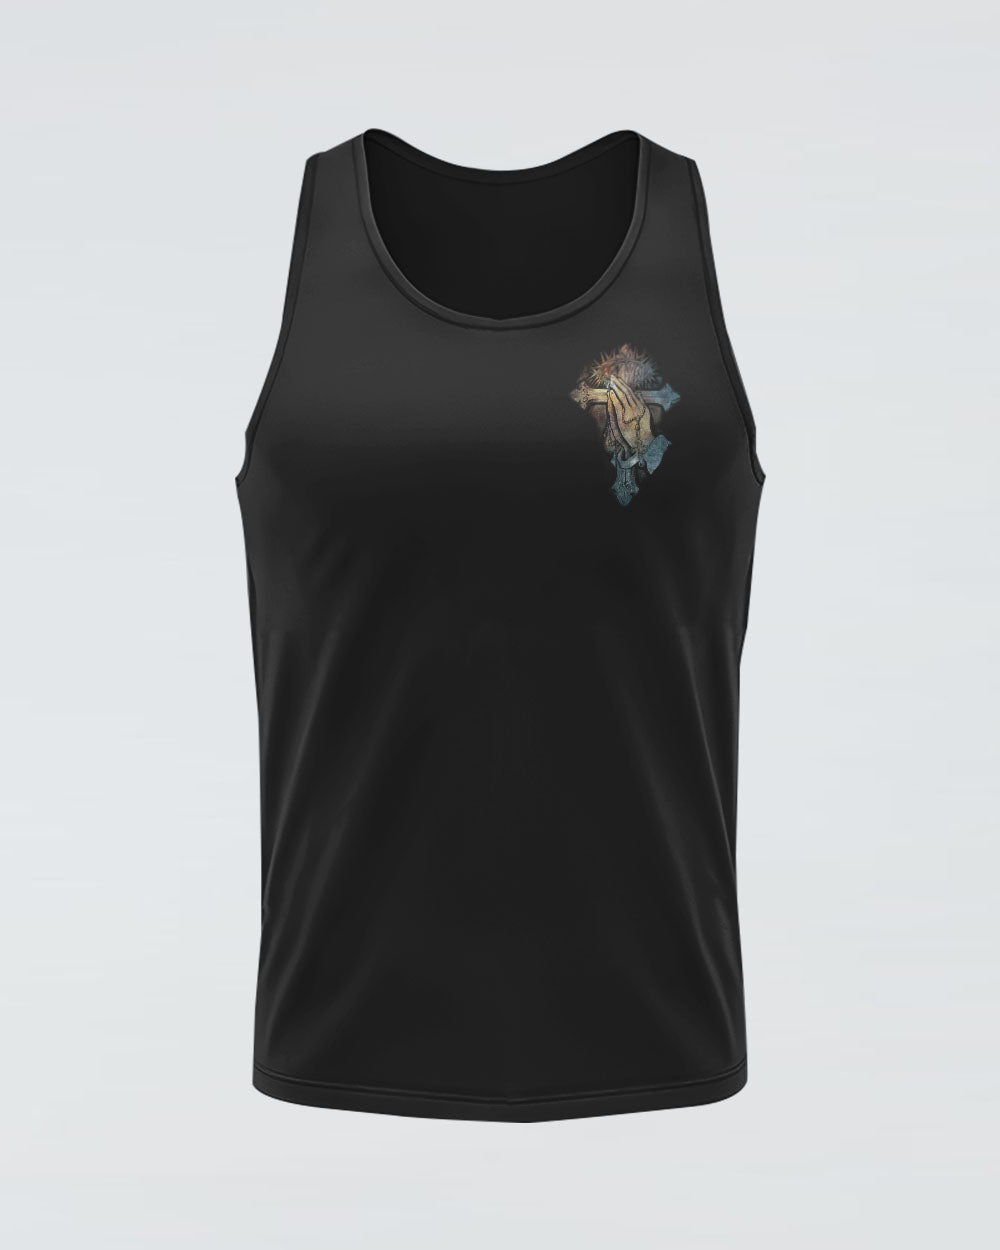 Fear Not For I Am With You Women's Christian Tanks